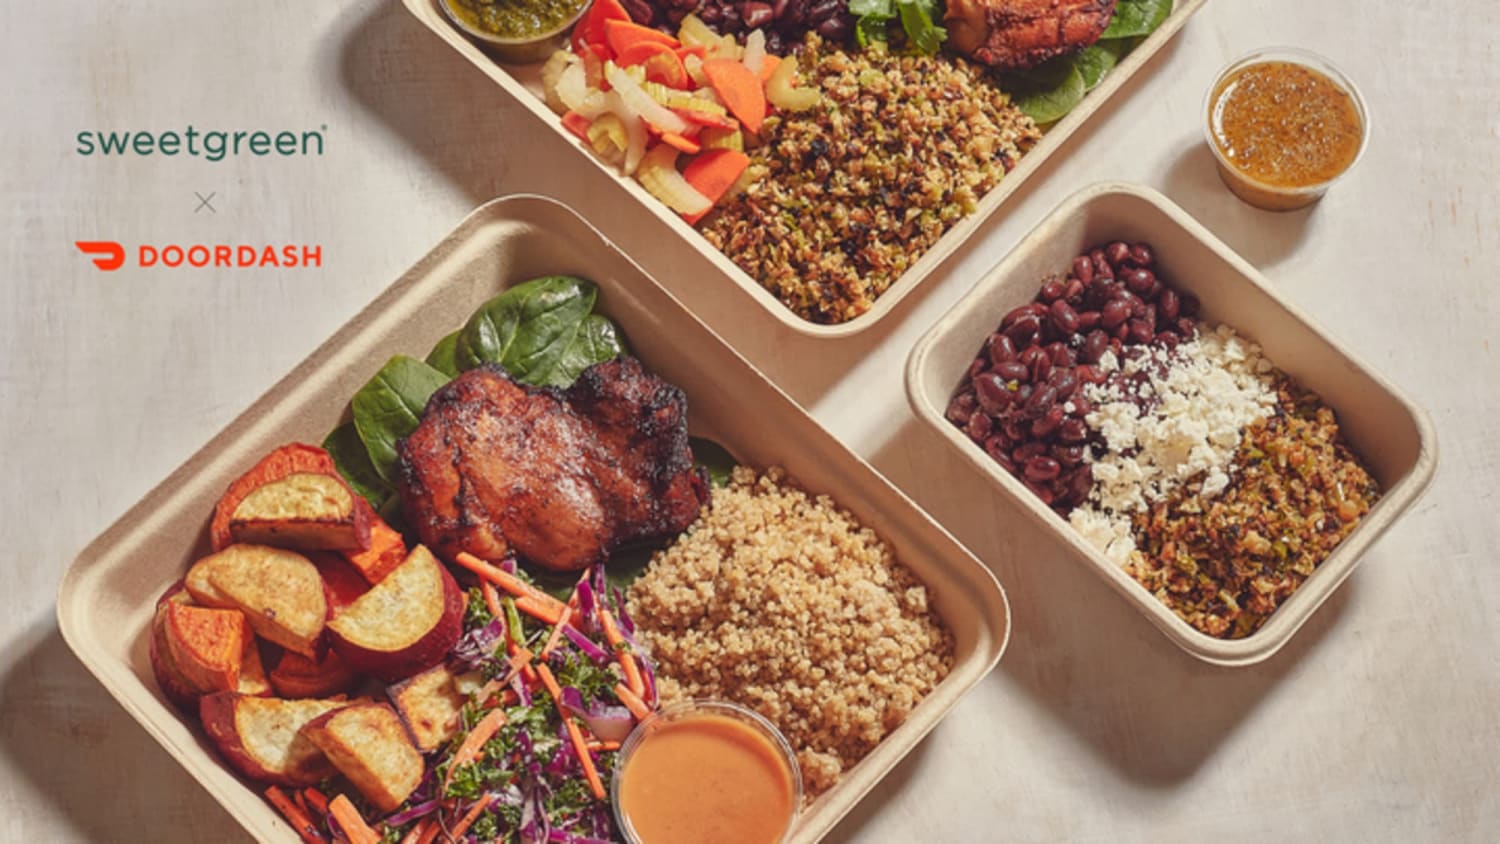 DoorDash adds partnership with sweetgreen, making real food convenient